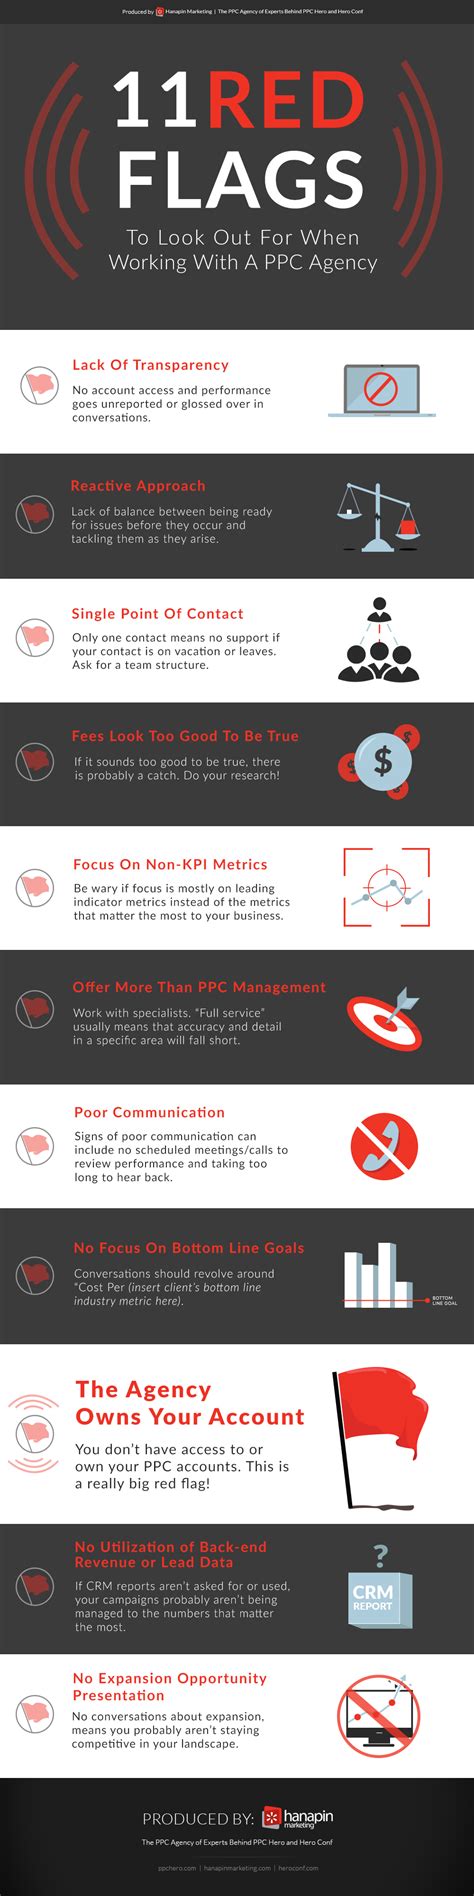 Have you seen any of these Red Flags with your agency? Social Media ...